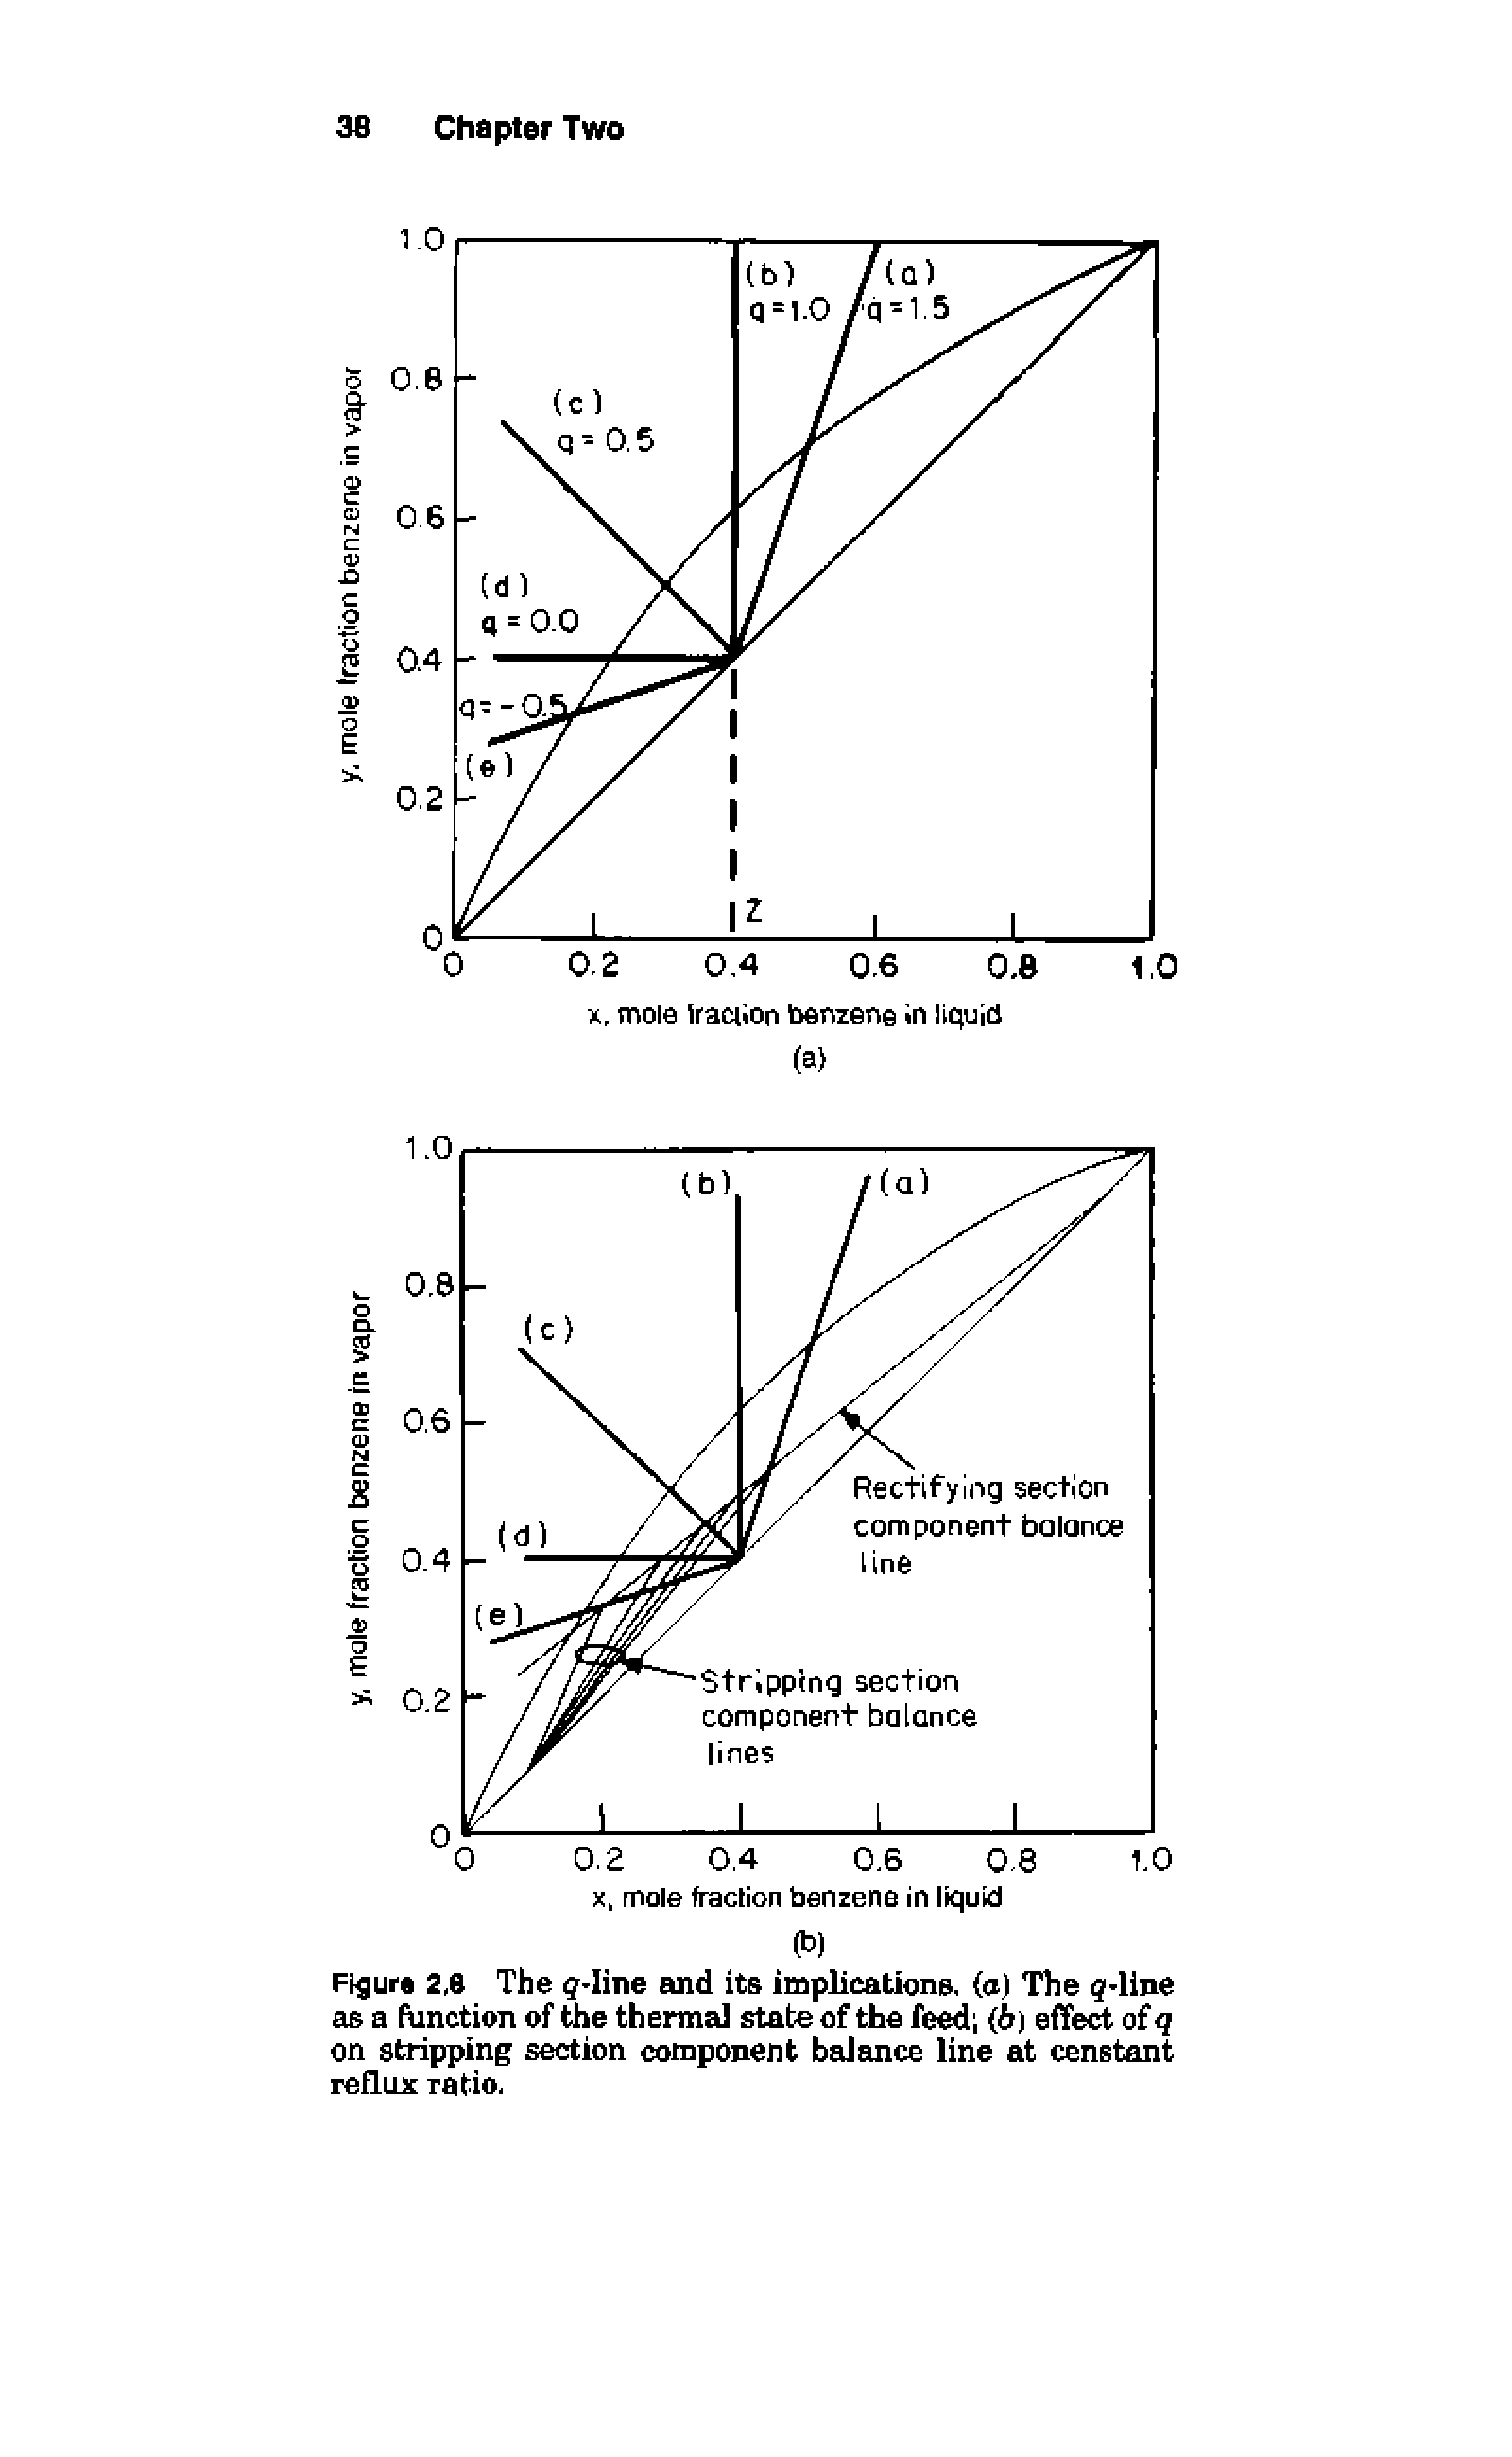 Figure 2,6 The g-Iine and its implications, (a) The 5-line as a (unction of the thermal state of the feed (6) effect of q on stripping section component balance line at censtant reflux ratio.